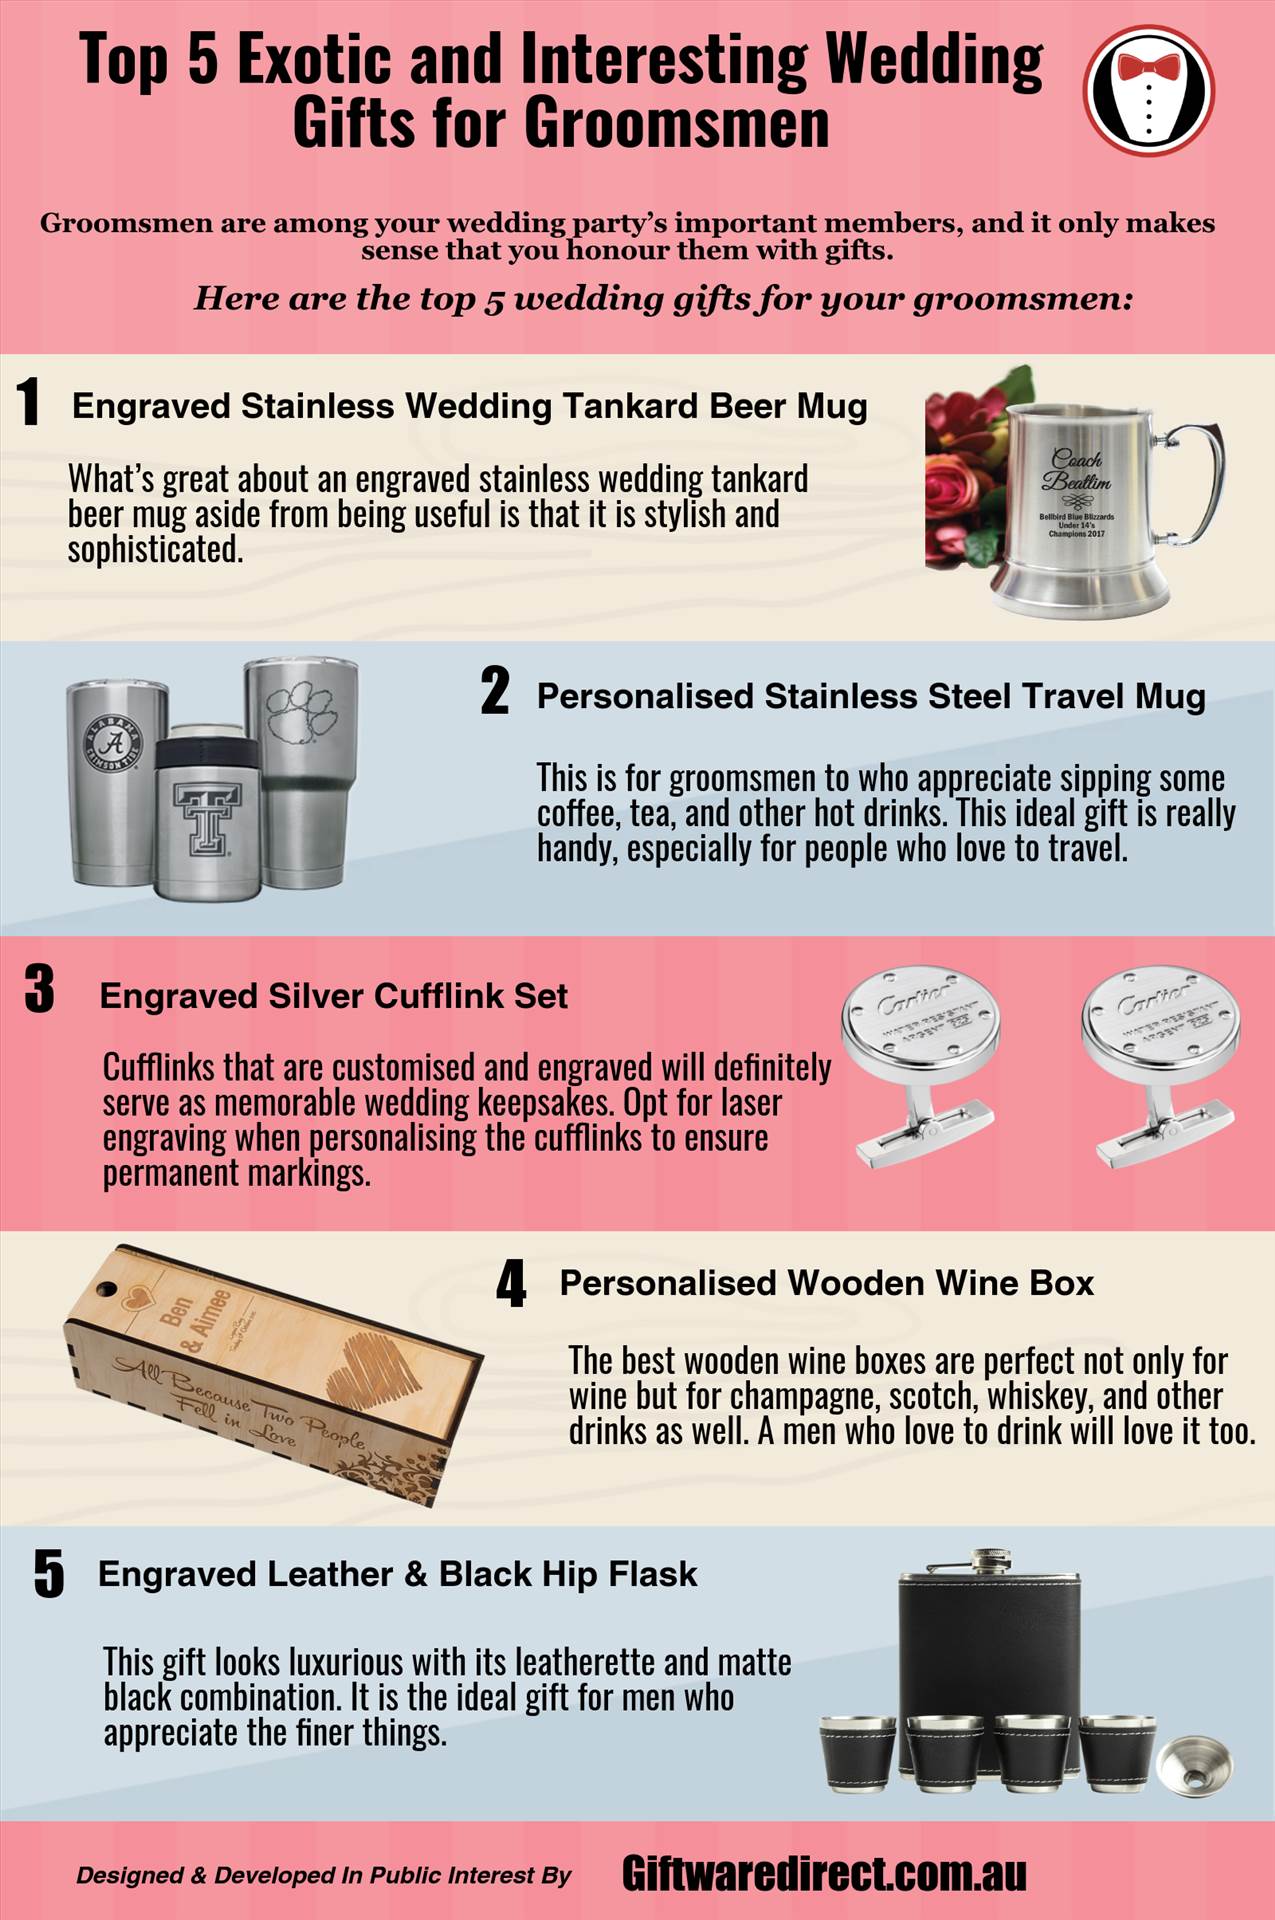 Top 5 Exotic and Interesting Wedding Gifts for Groomsmen.png  by Giftwaredirect